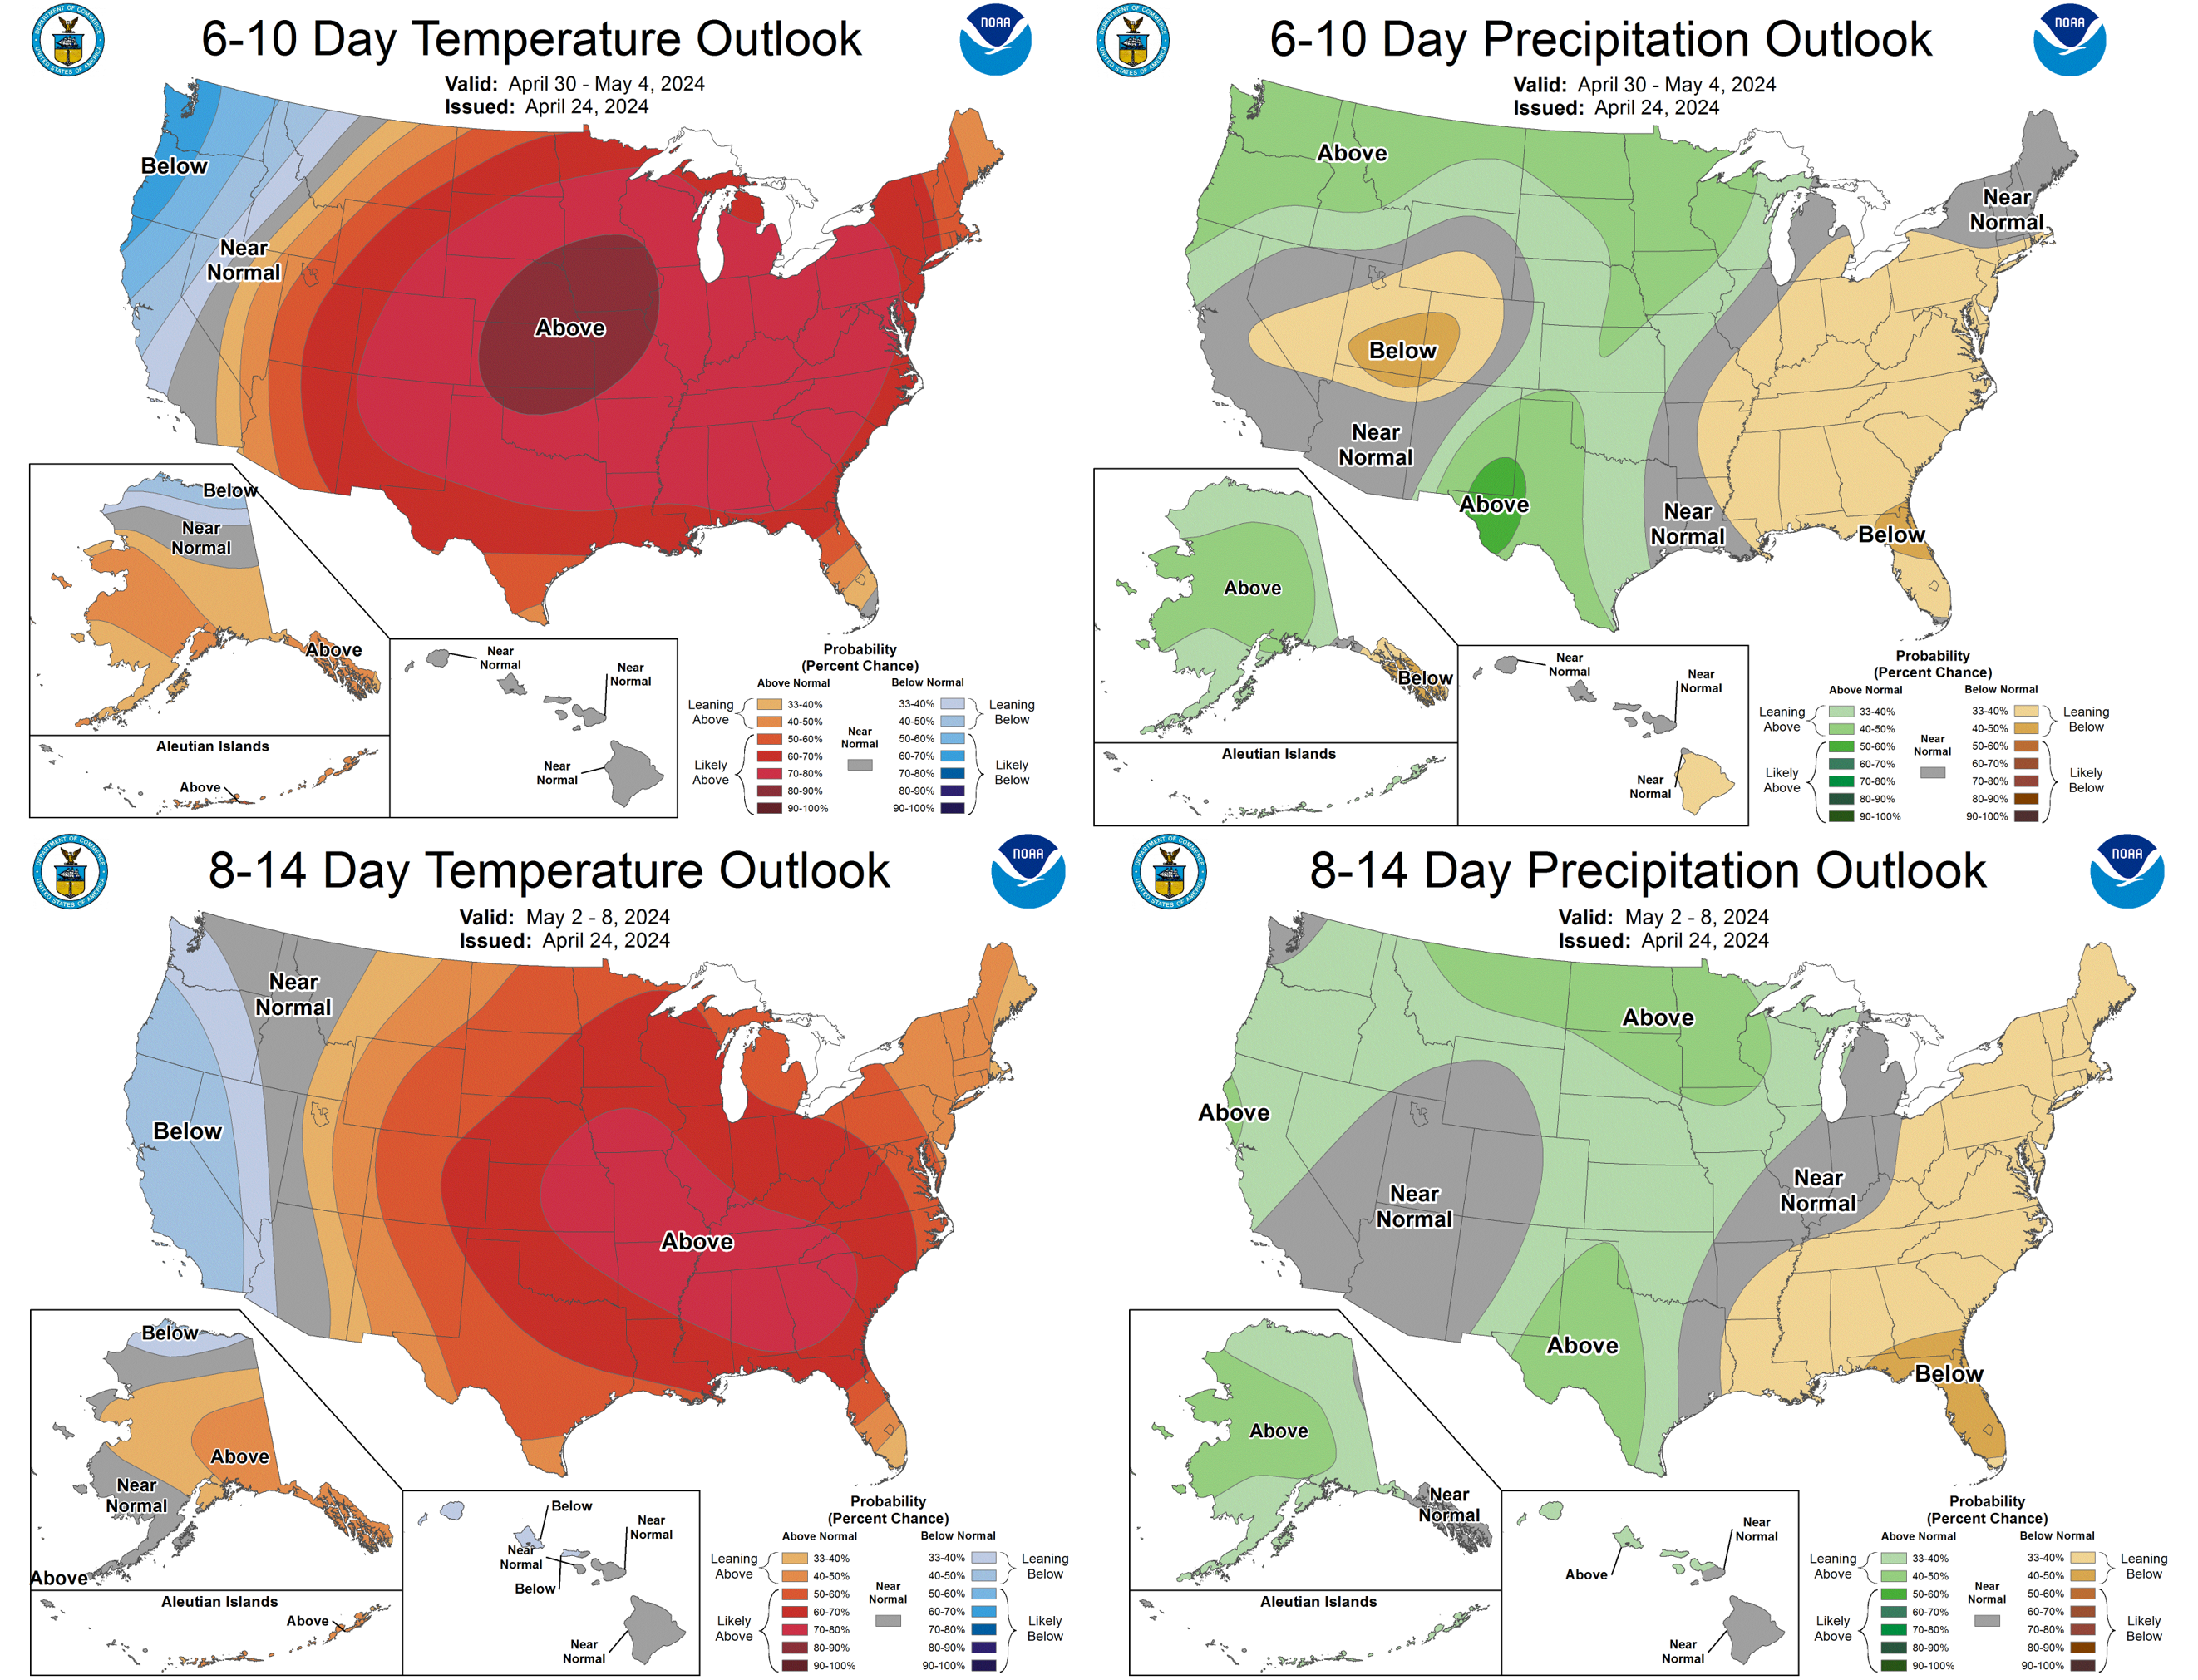 U.S. maps showing temperature and precipitation outlooks.